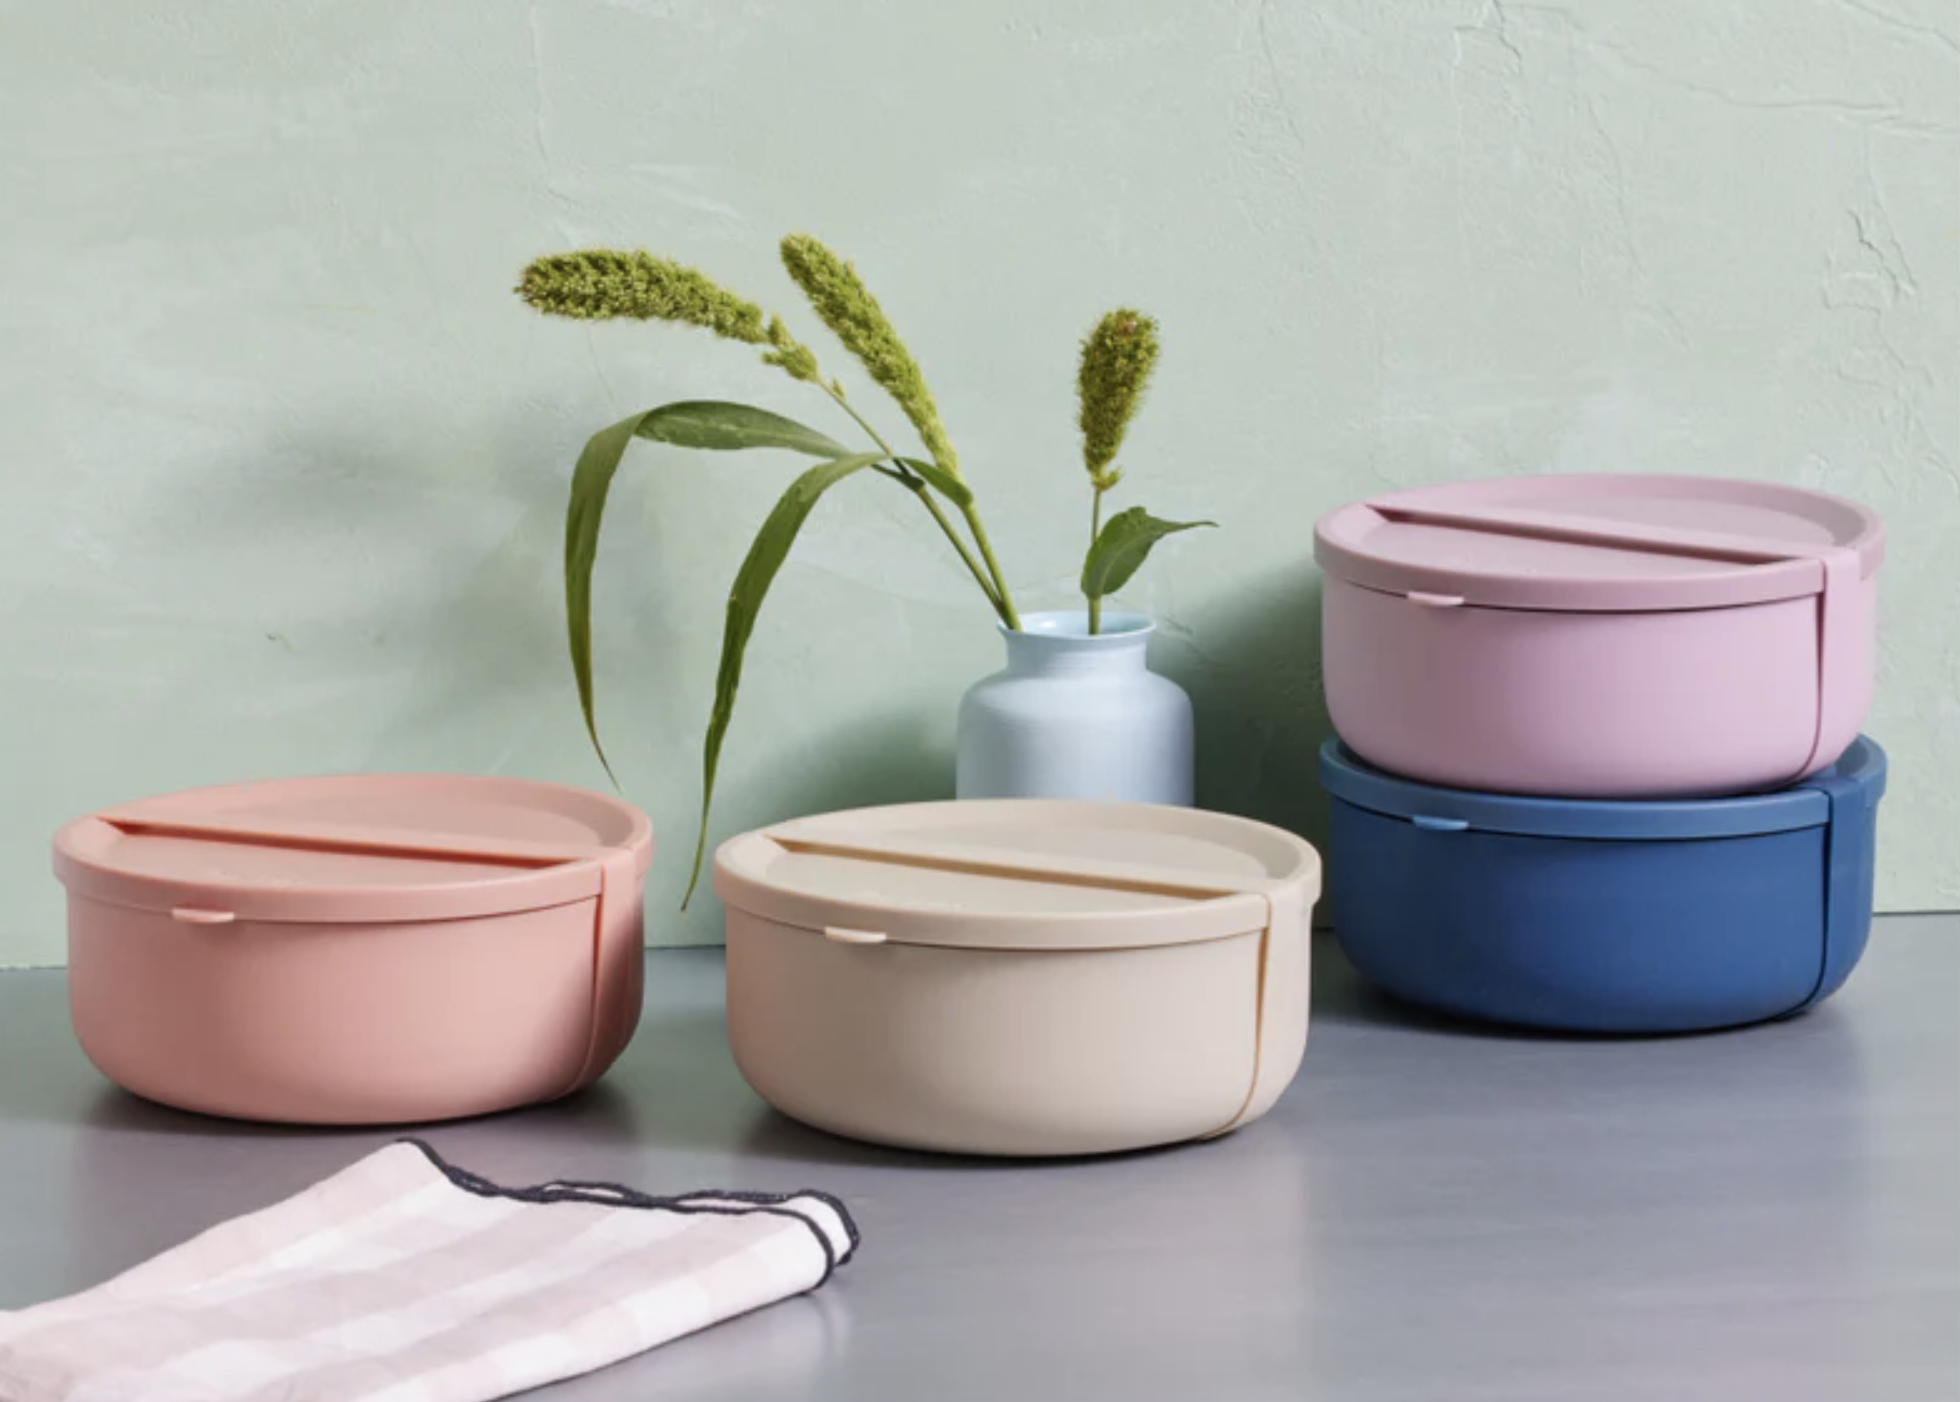 Four lunch bowls and a plant